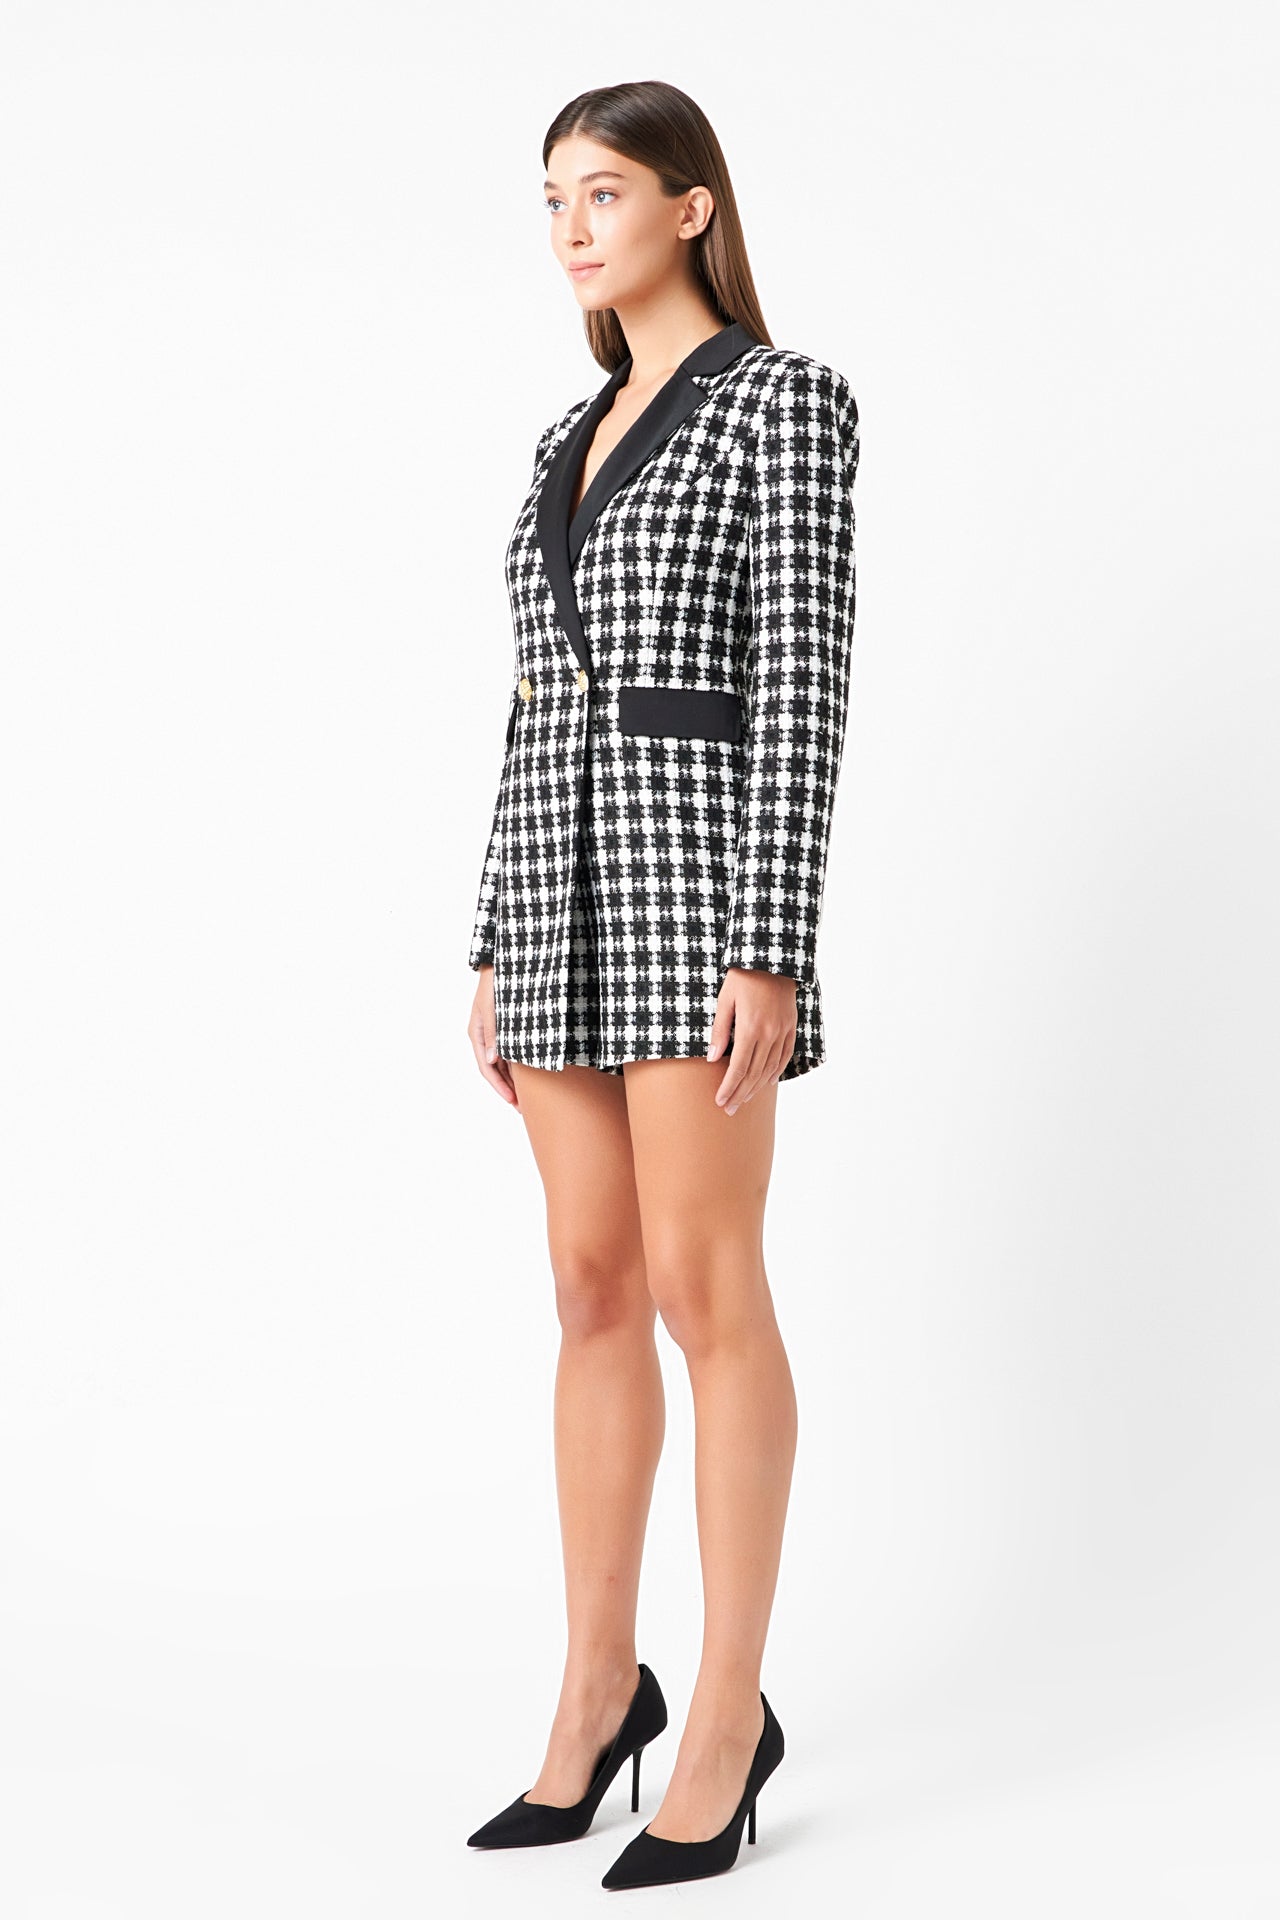 ENDLESS ROSE - Premium Houndstooth Blazer Romper - ROMPERS available at Objectrare